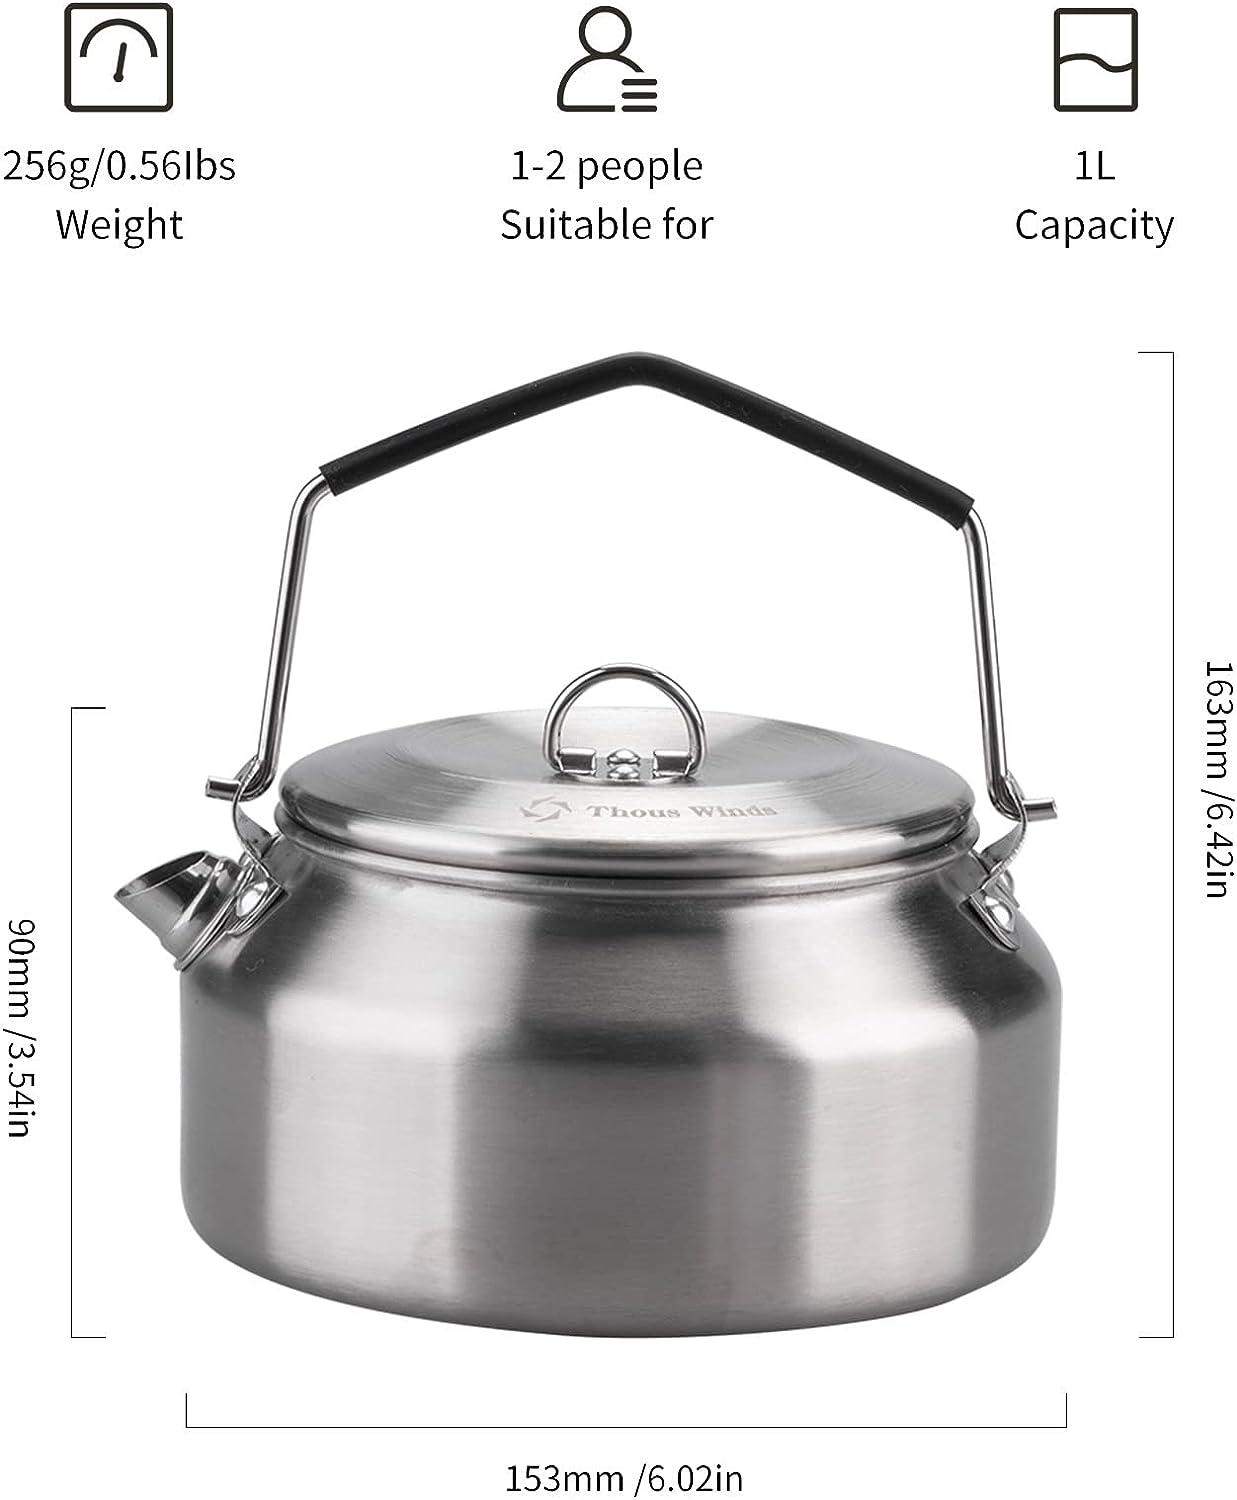 Outdoor Durable Stainless Steel Backpacking Camping Kettle Coffee